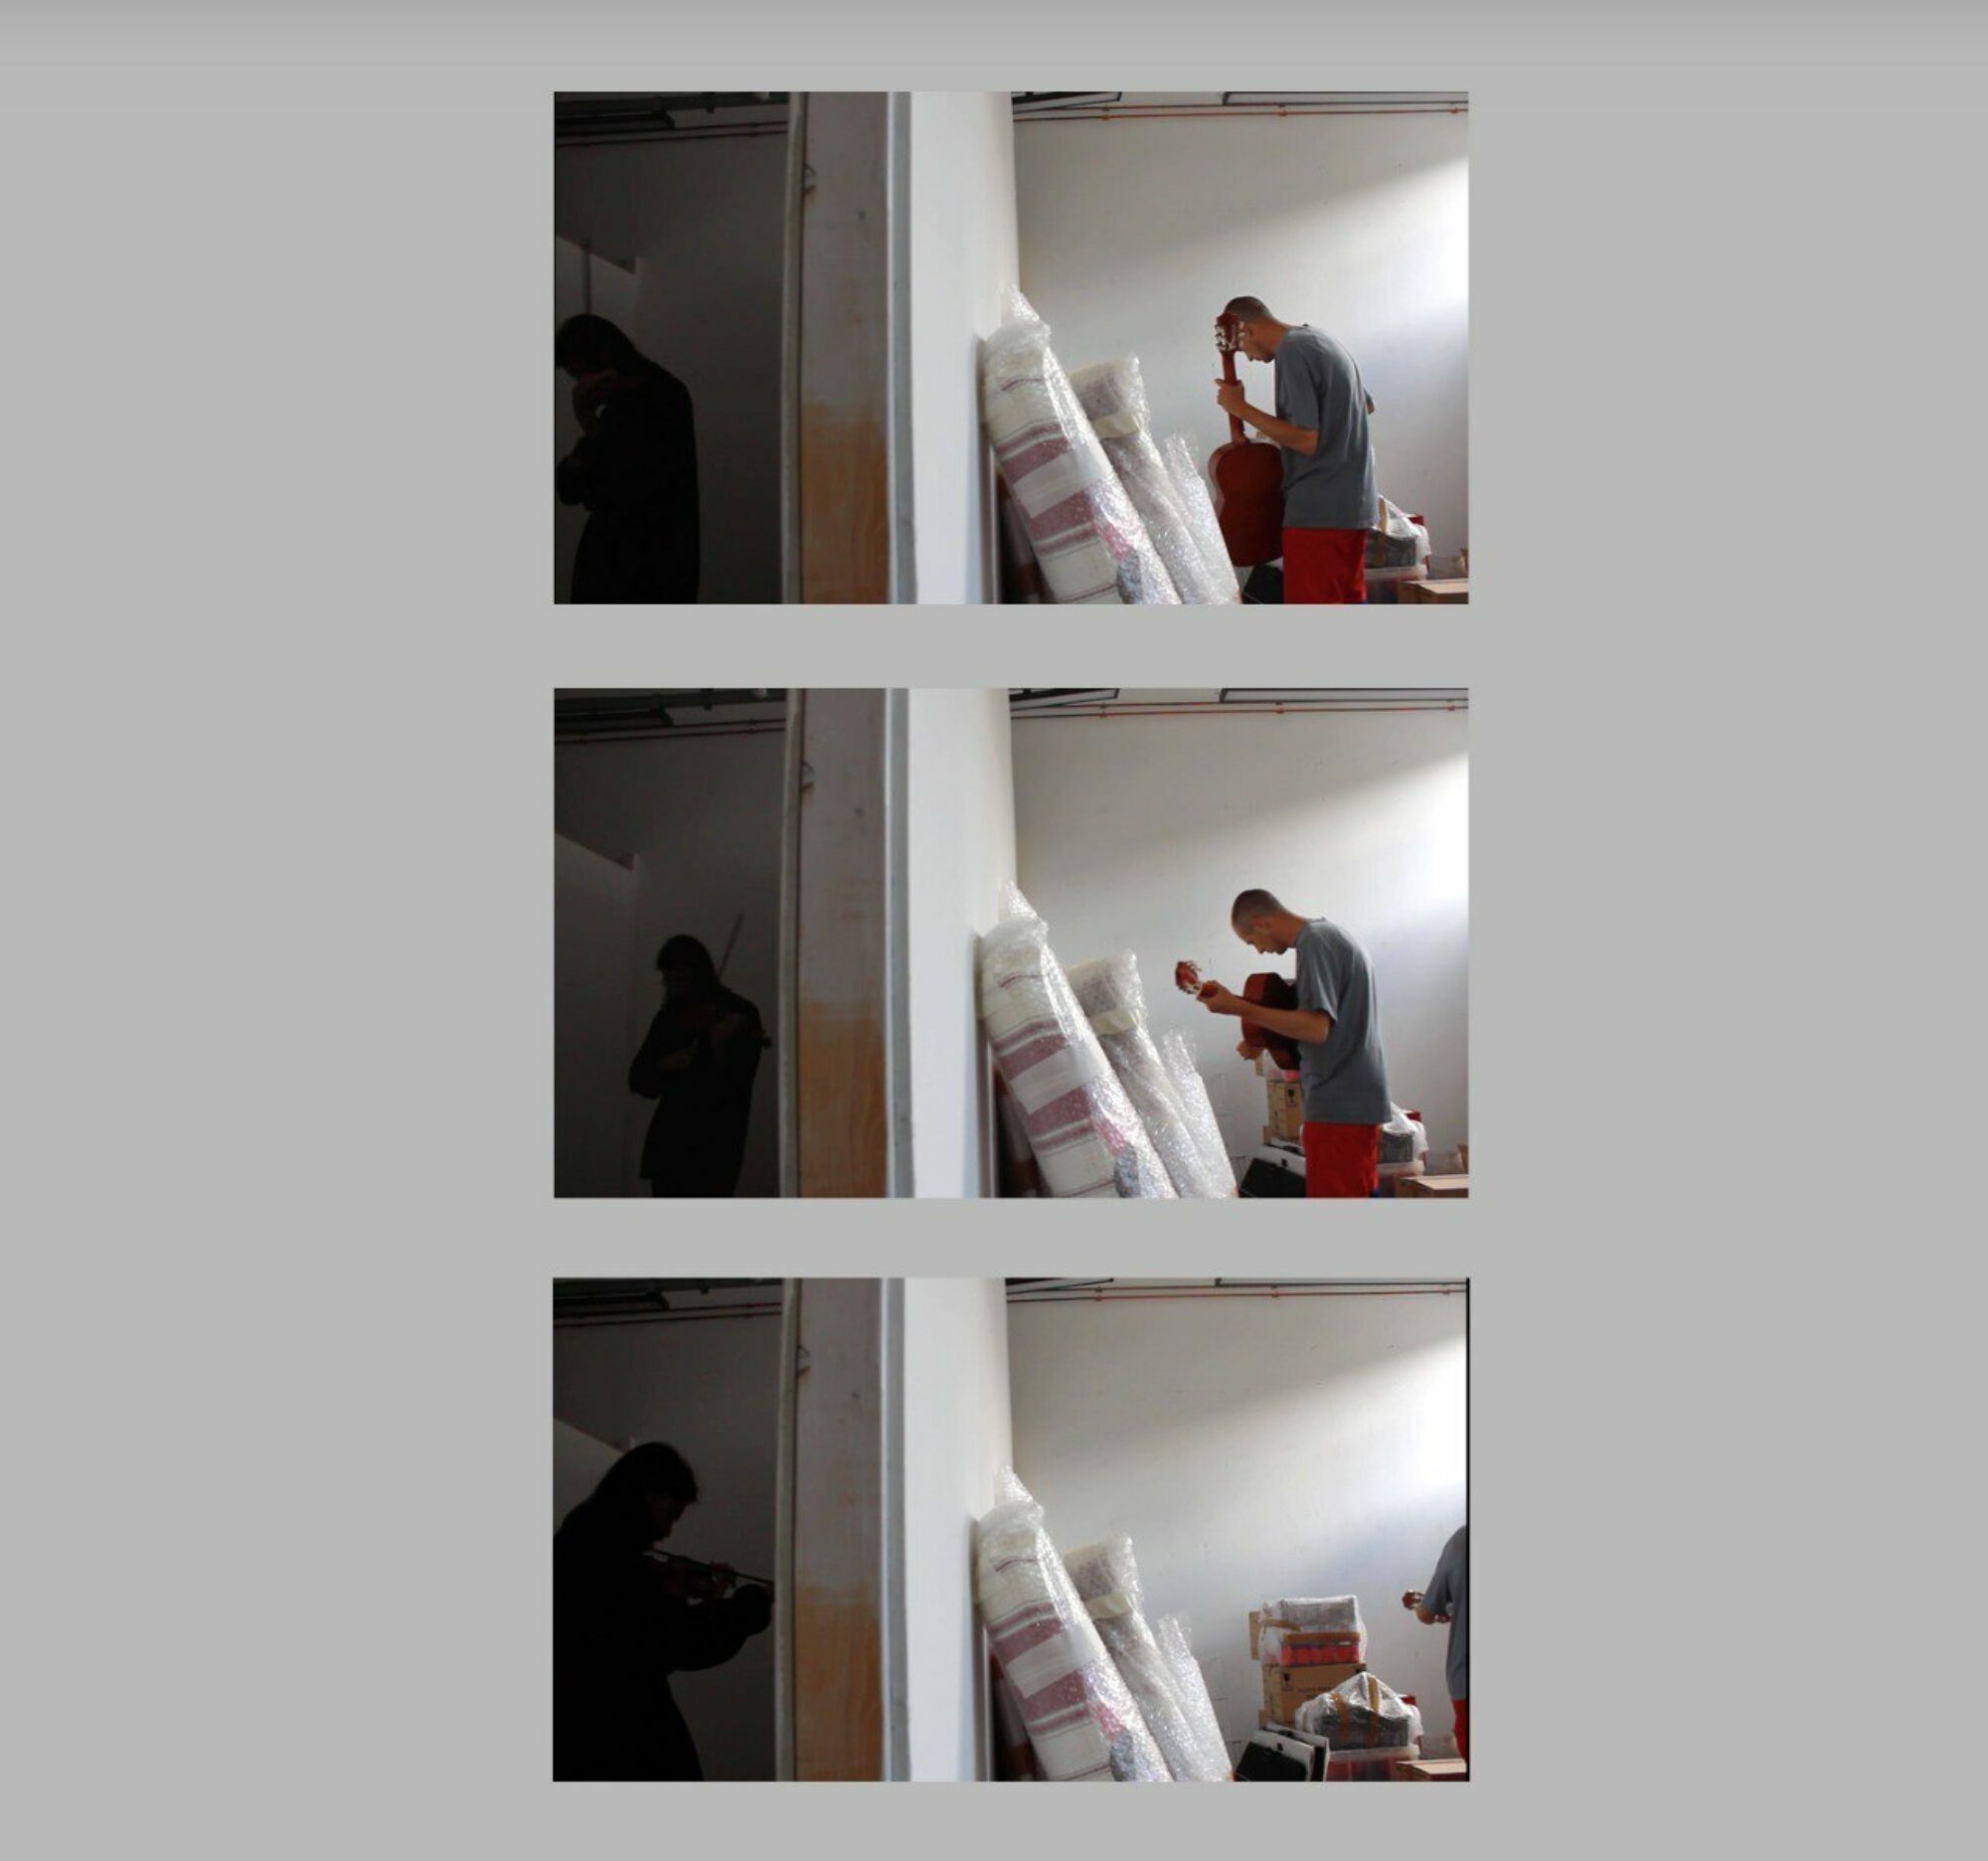 Three photos composed vertically; someone's room where they are playing guitar.